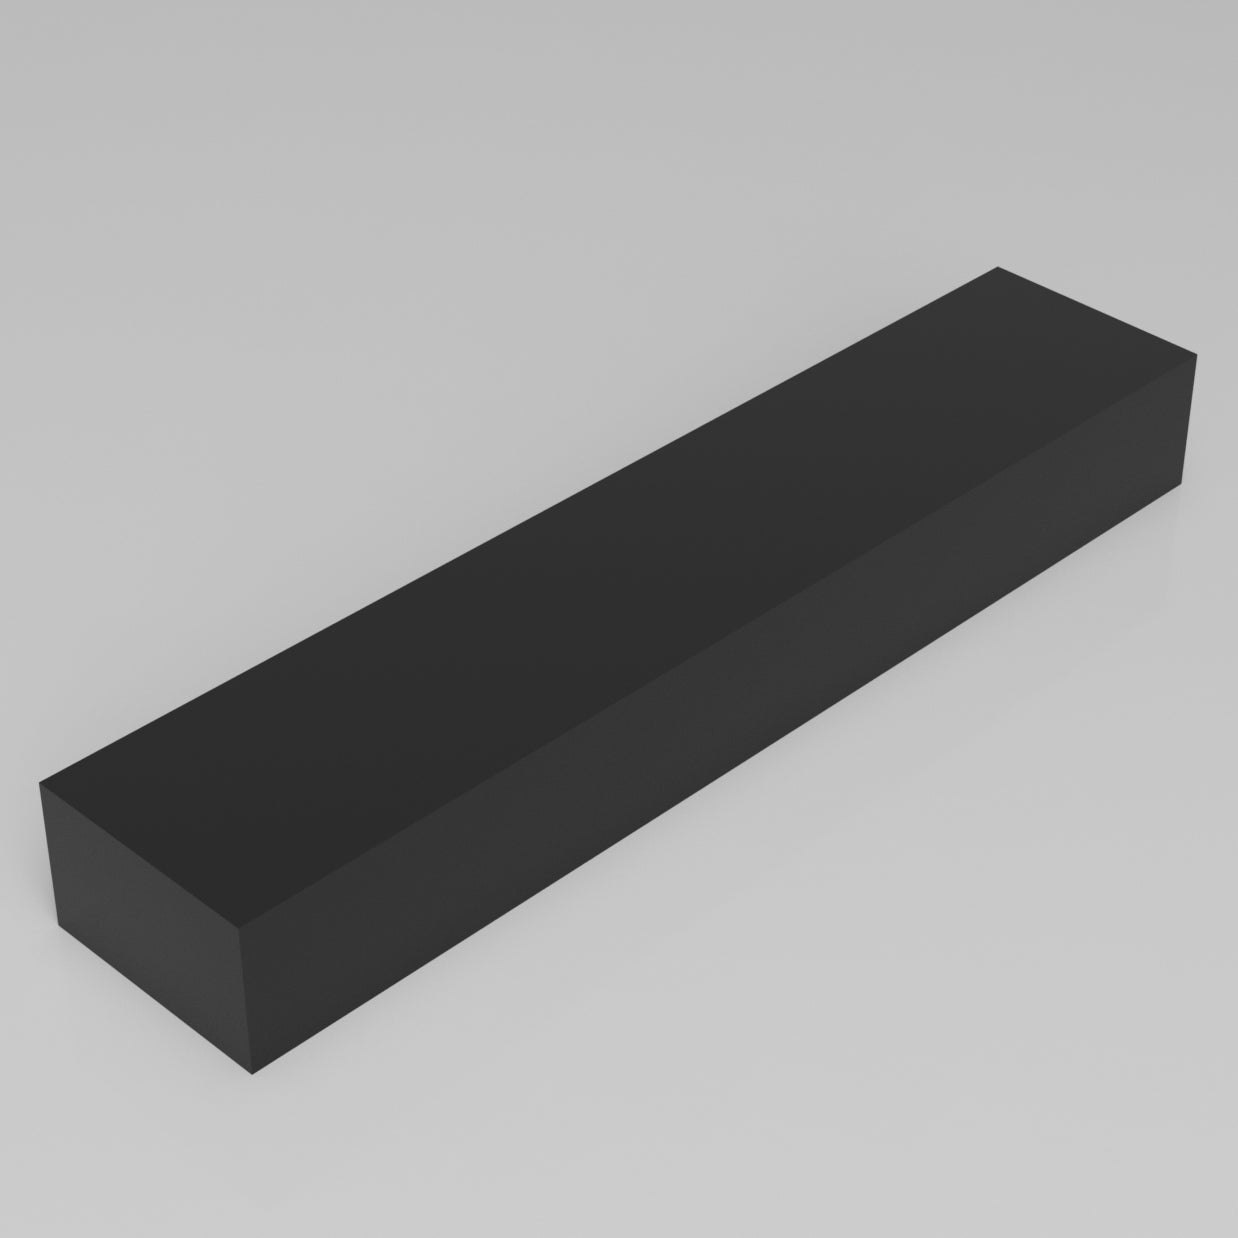 Machinable Wax Rectangular Block Front View 3 Inch by 5 Inch by 24 Inch